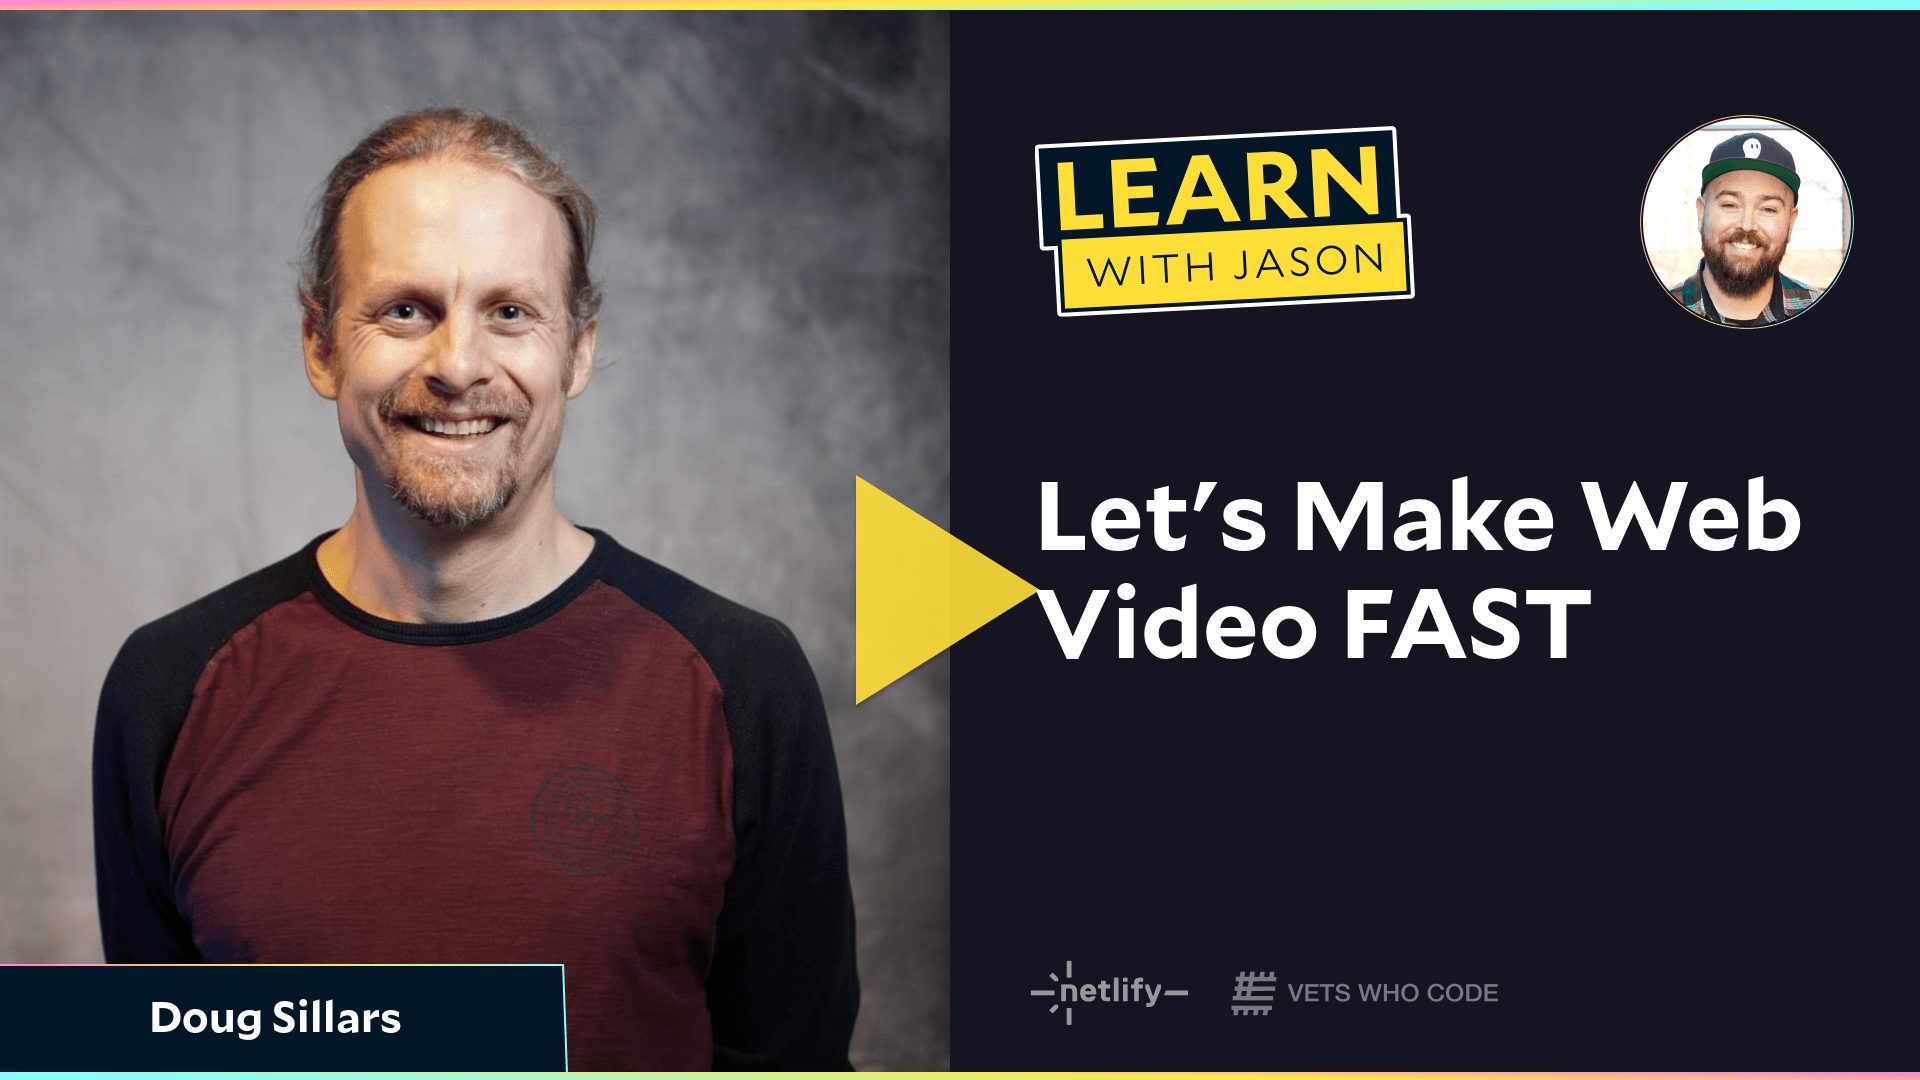 Let's Make Web Video FAST (with Doug Sillars)